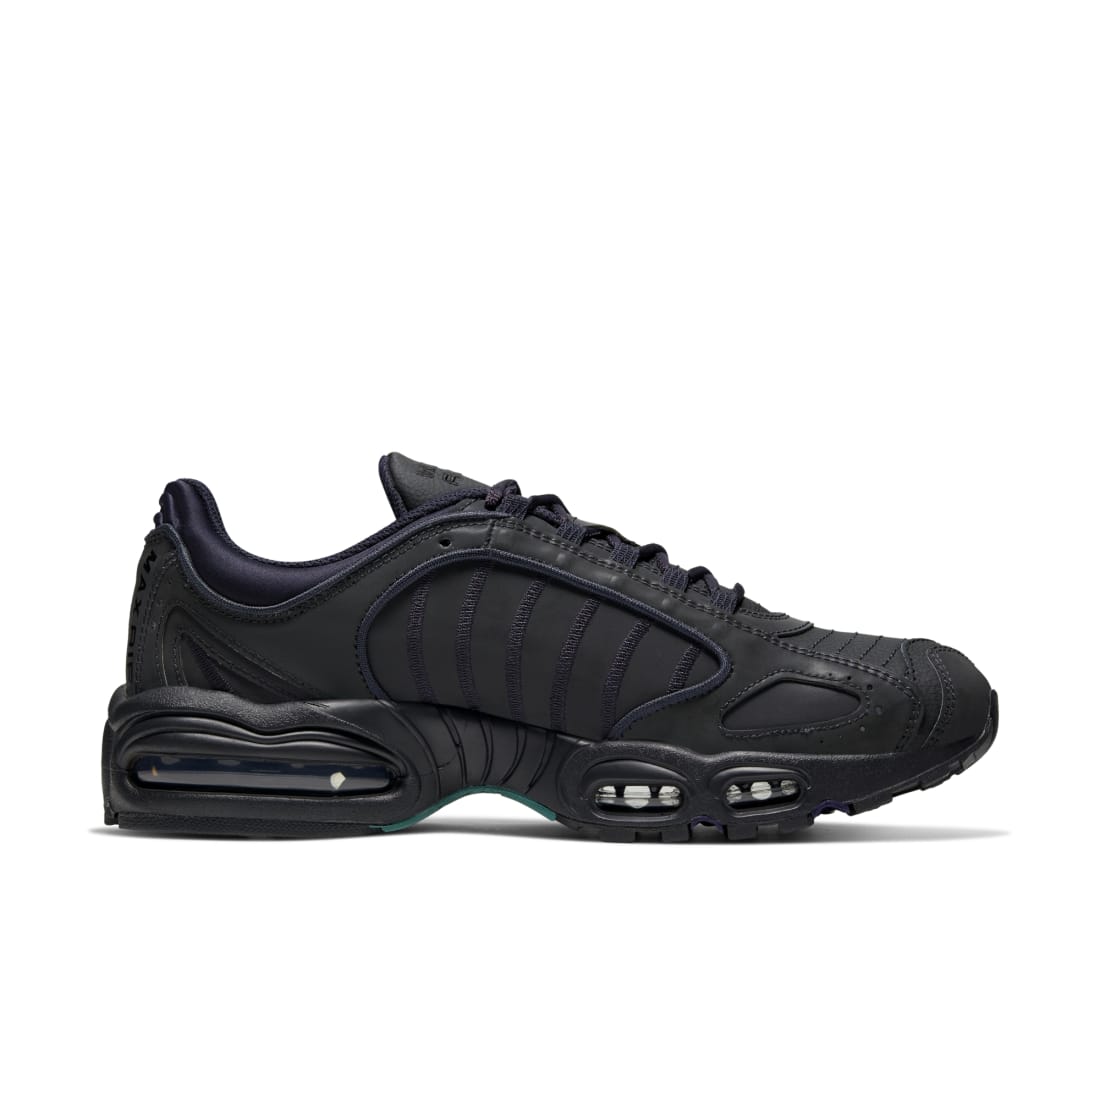 Nike Air Max Tailwind 4 99 SP Black | Nike | Sole Collector